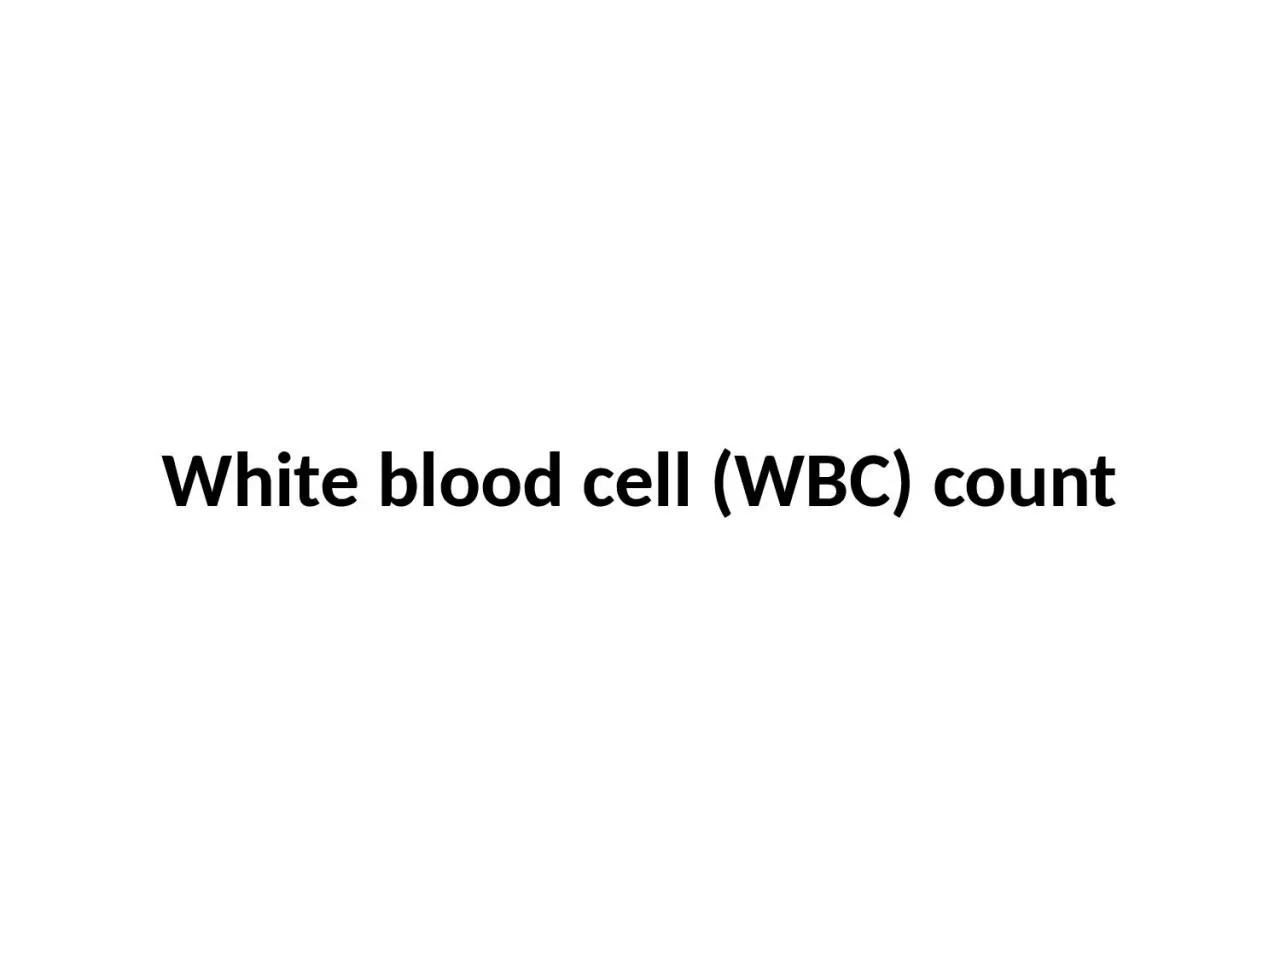 White blood cell (WBC) count